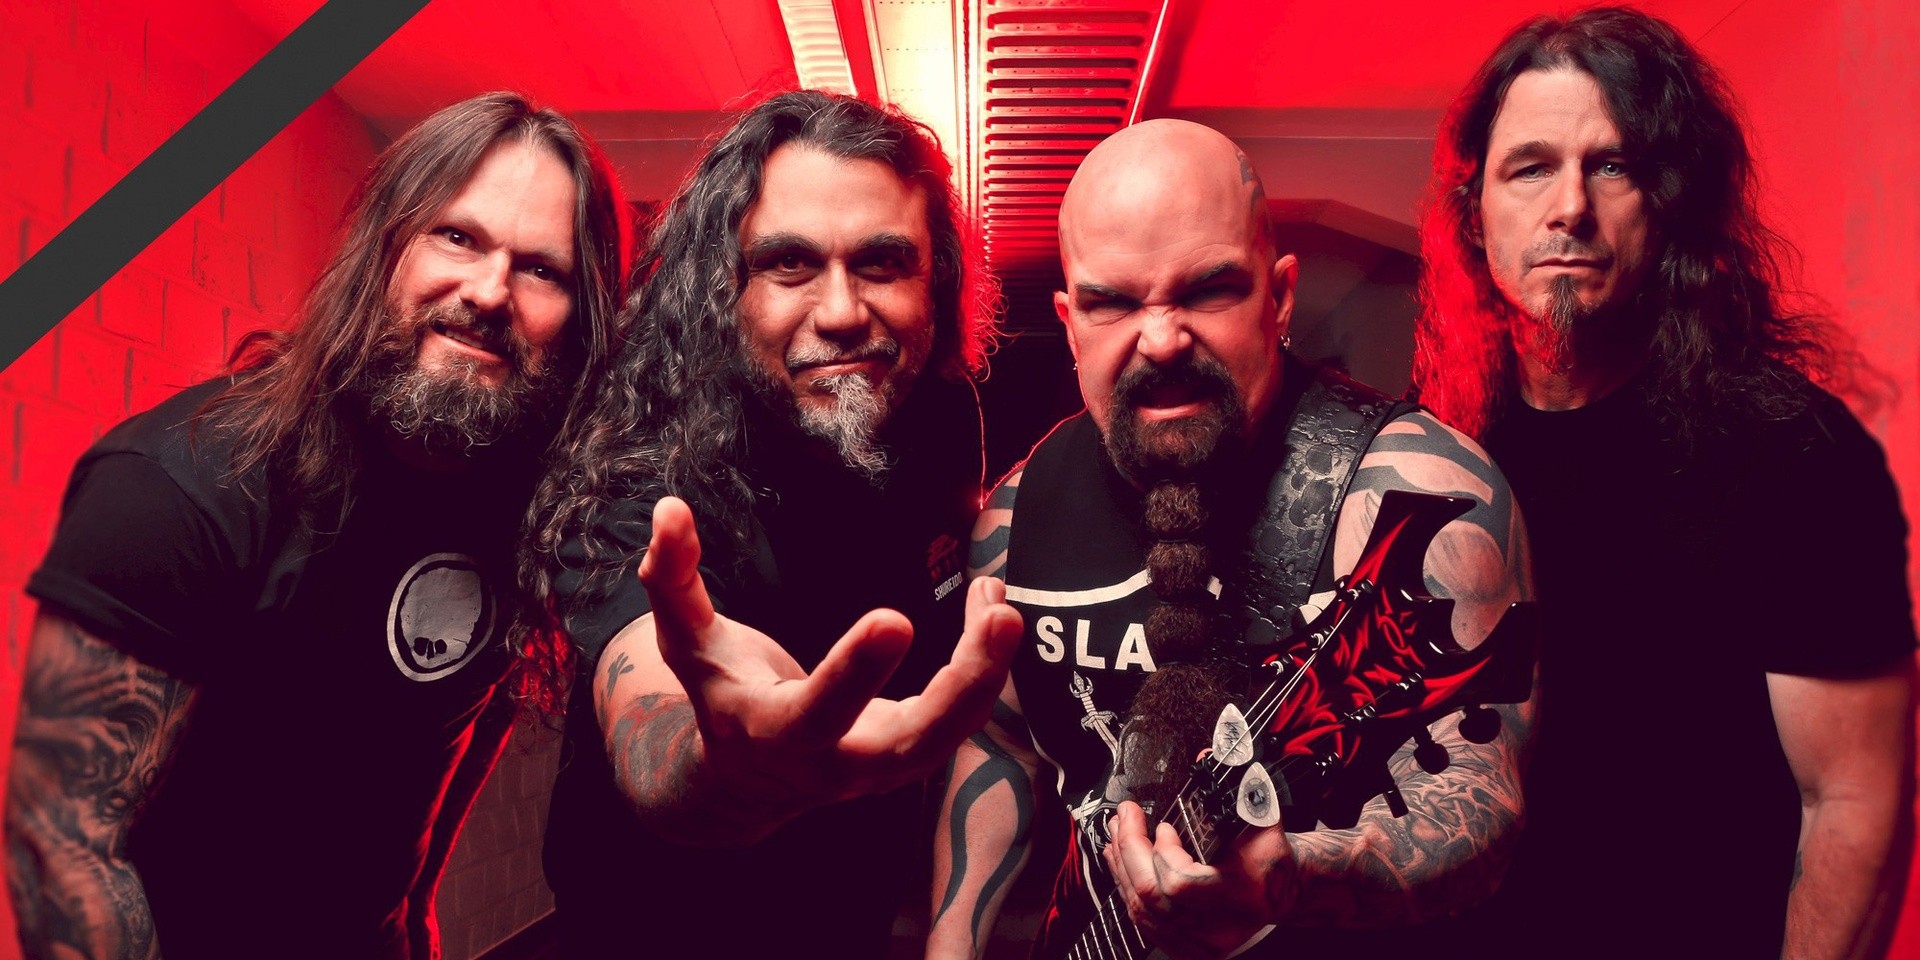 Are Slayer coming to Southeast Asia?